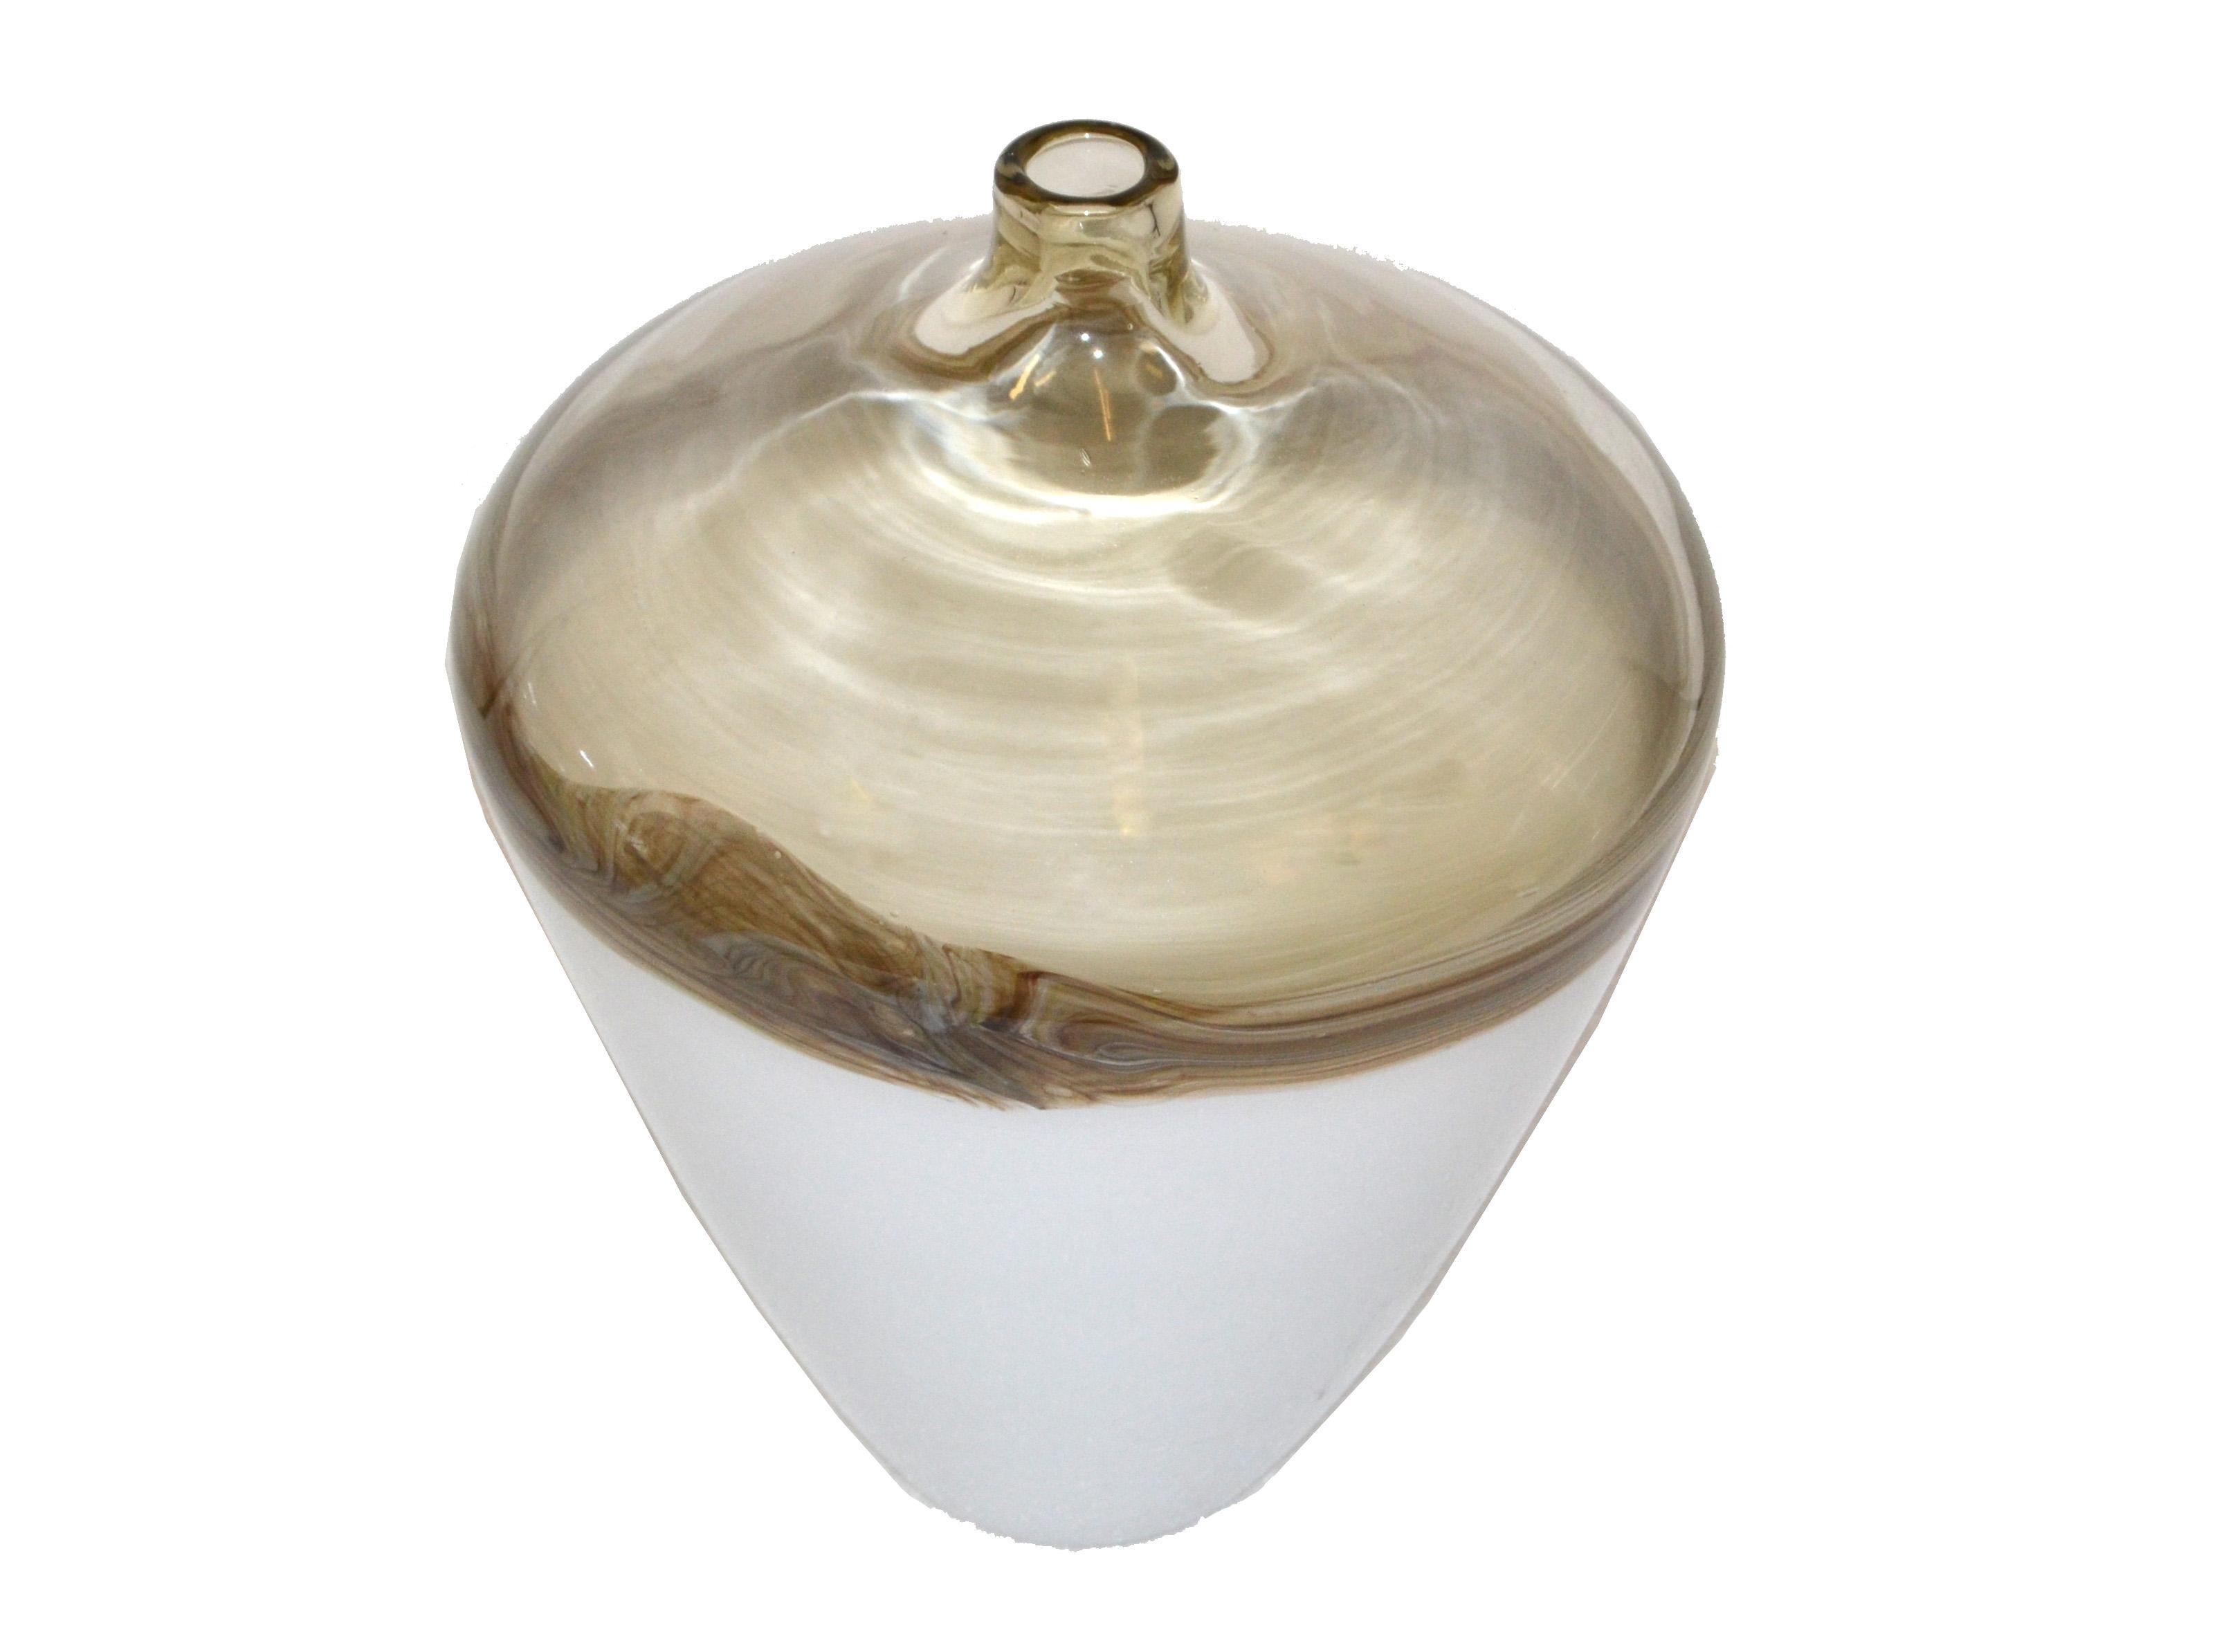 Stunning accent table vase shaped as an urn in white Opaline glass with beige and brown Murano art glass, manufactured in Italy in 1979.
The Core is made in white opaline glass and lined with stripes of beige, brown and white on the top. 
Unique